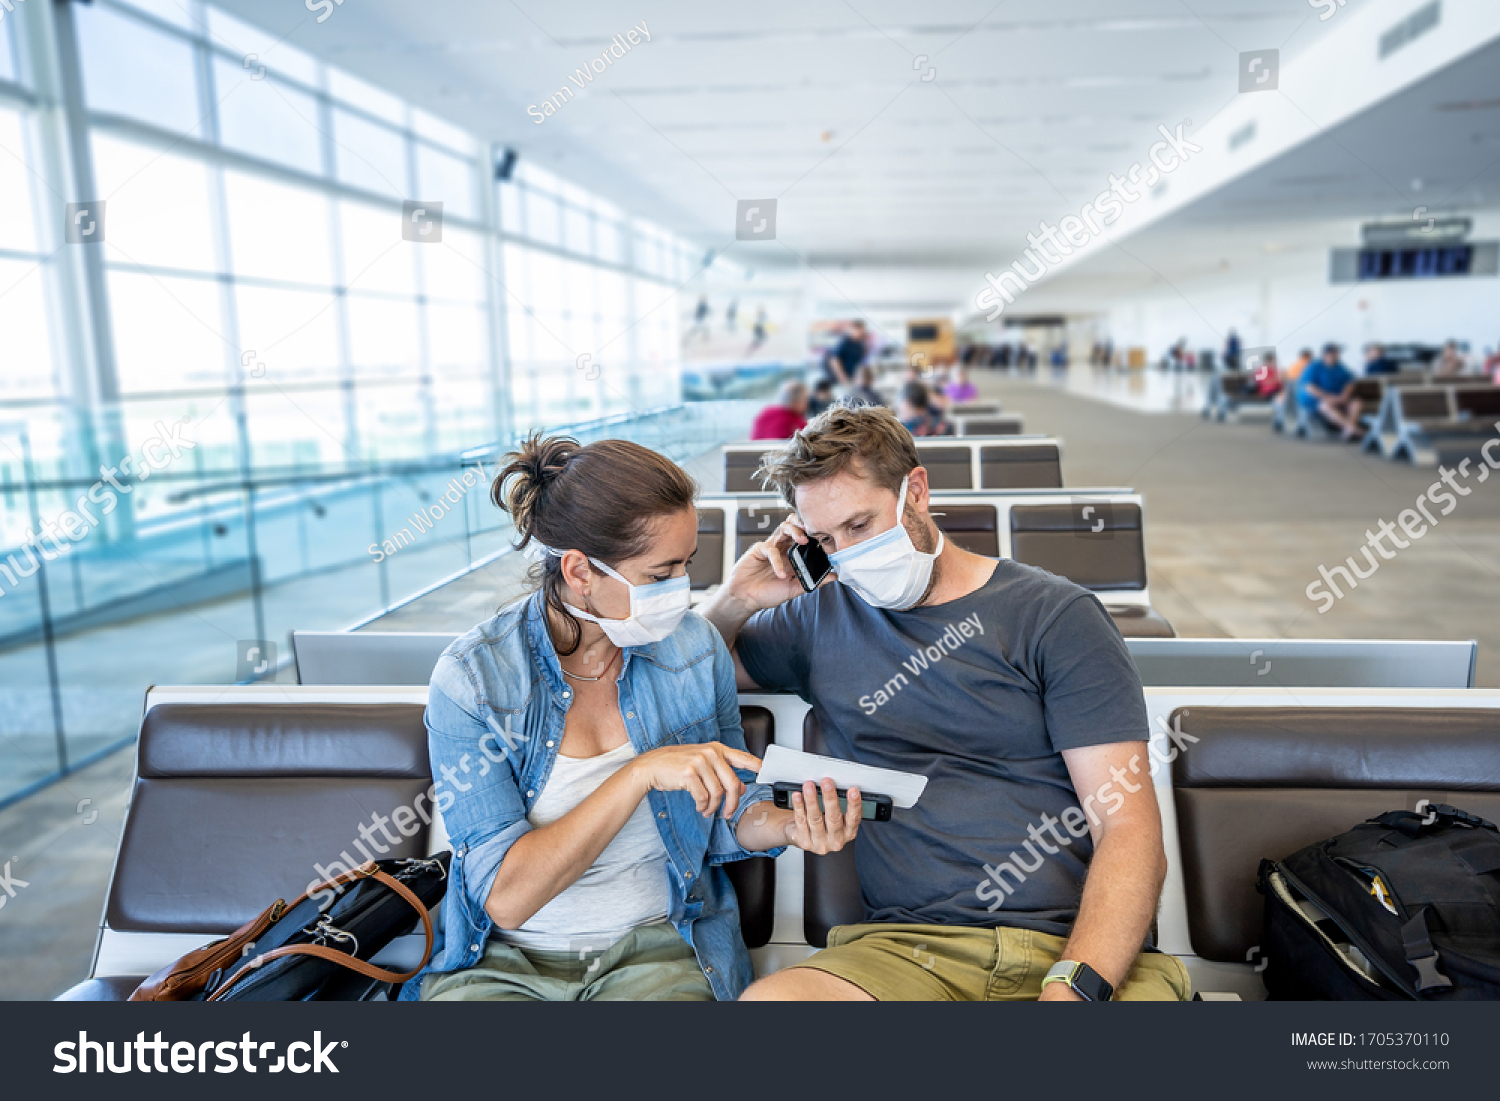 COVID-19 worldwide borders closures. Couple with face mask stuck in airport terminal after being denied entry to other countries. Passengers stranded in airport on his travel back to home country. #1705370110